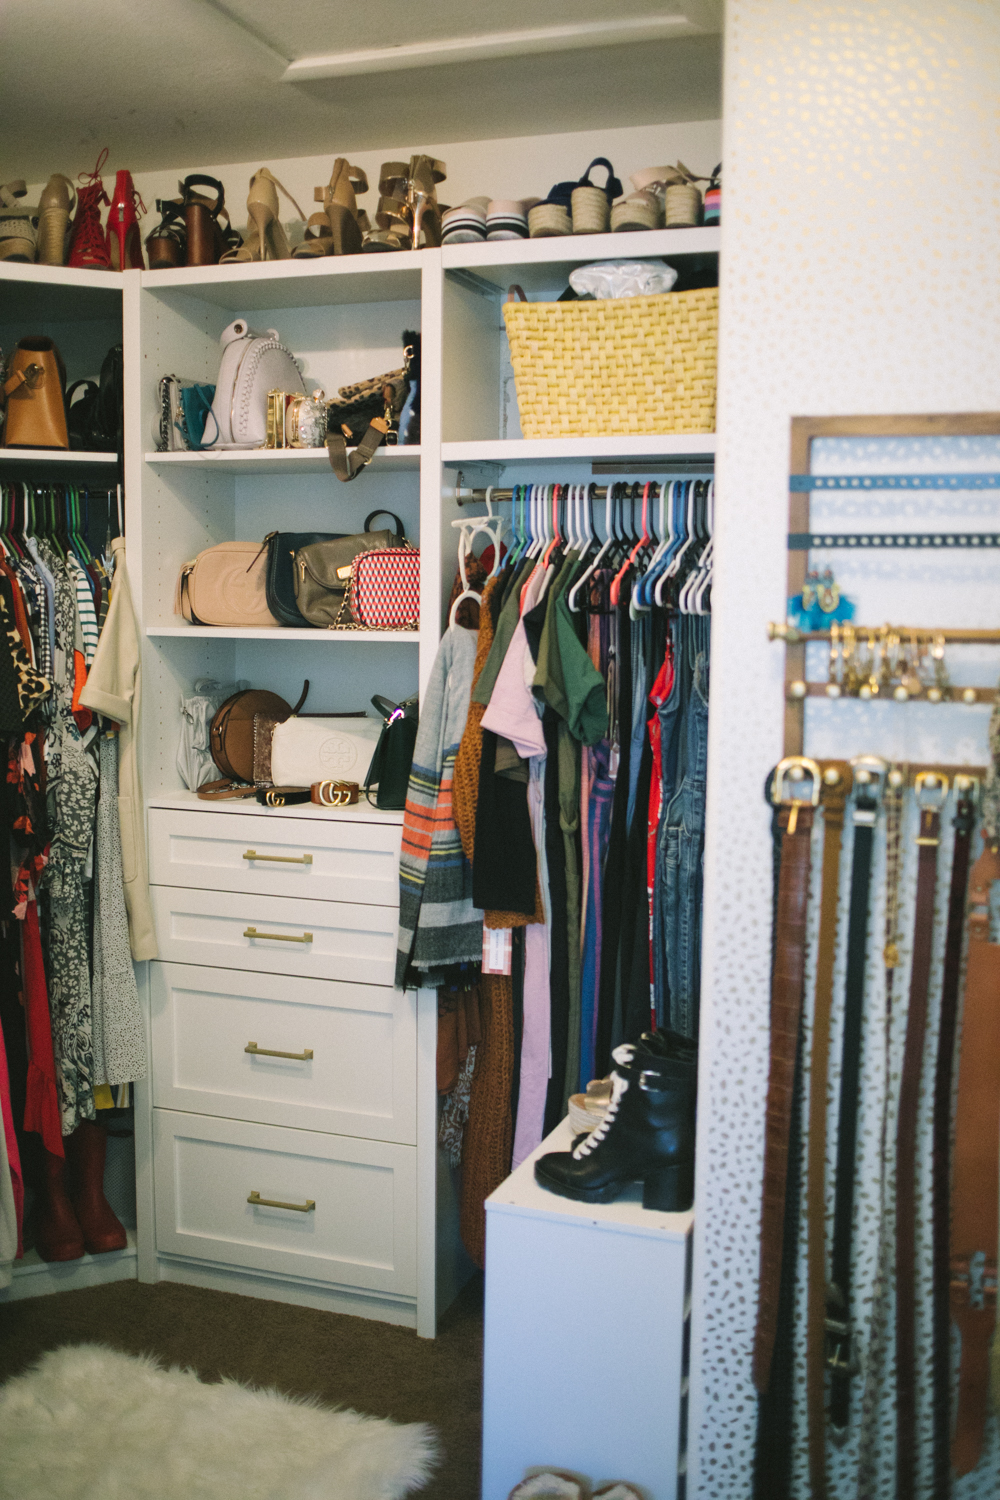 The Latest Closet Renovation Ideas with ClosetMaid featured by top Las Vegas lifestyle blog, Life of a Sister